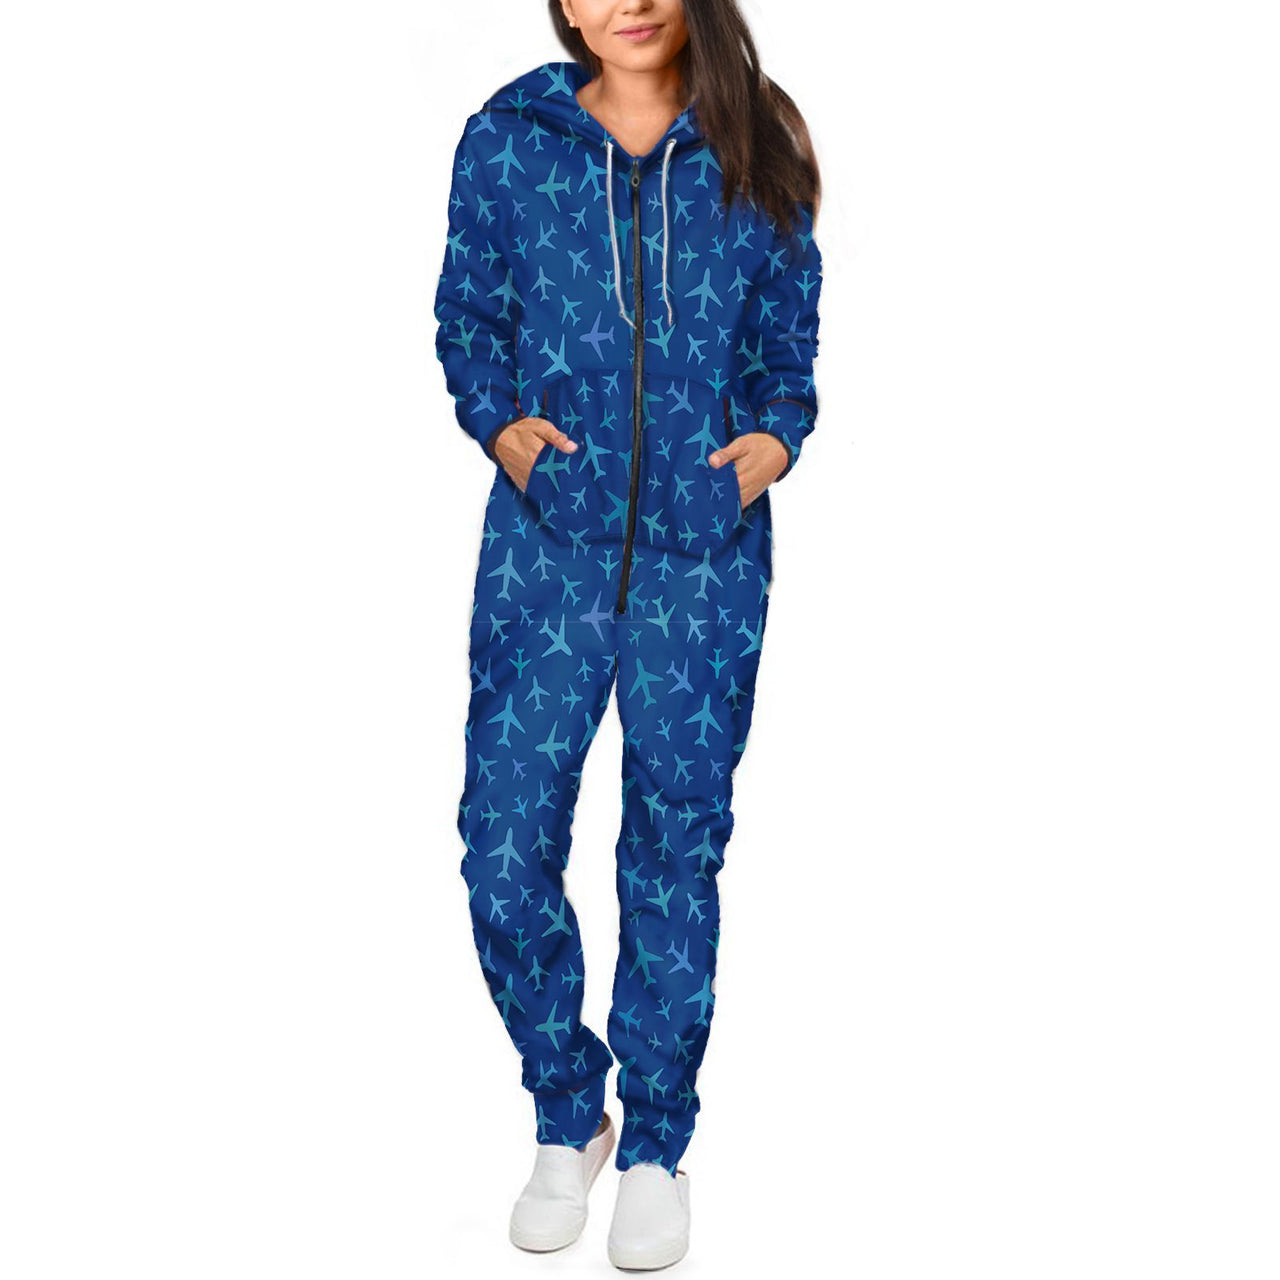 Many Airplanes Blue Designed Jumpsuit for Men & Women